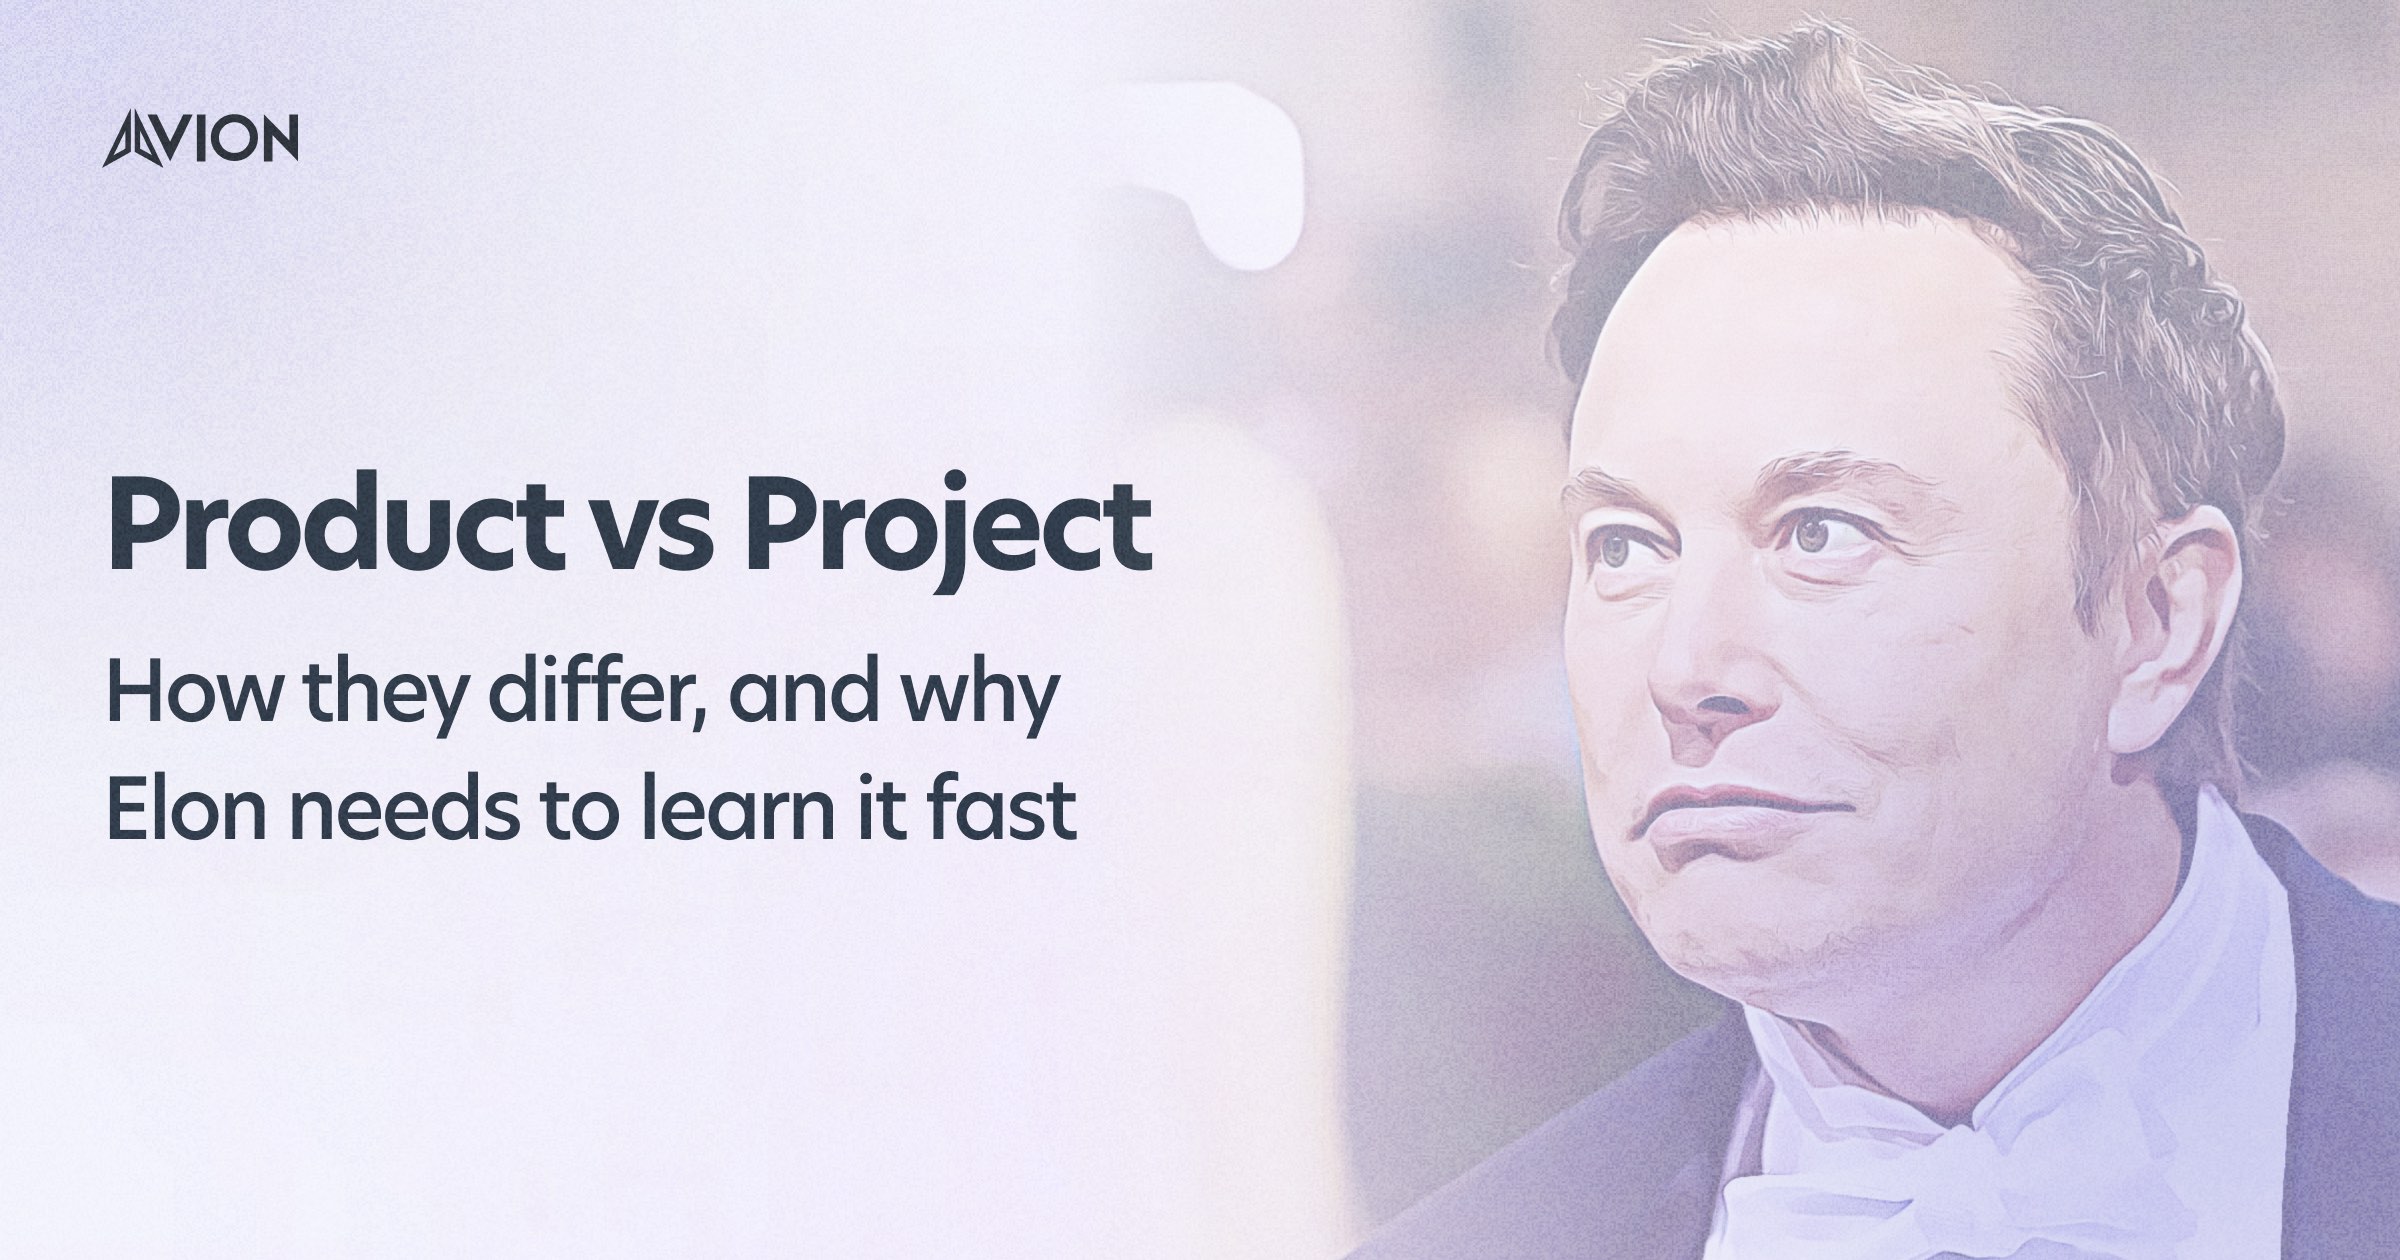 Product vs Project: How They Differ, and Why Elon Needs To Learn It Fast